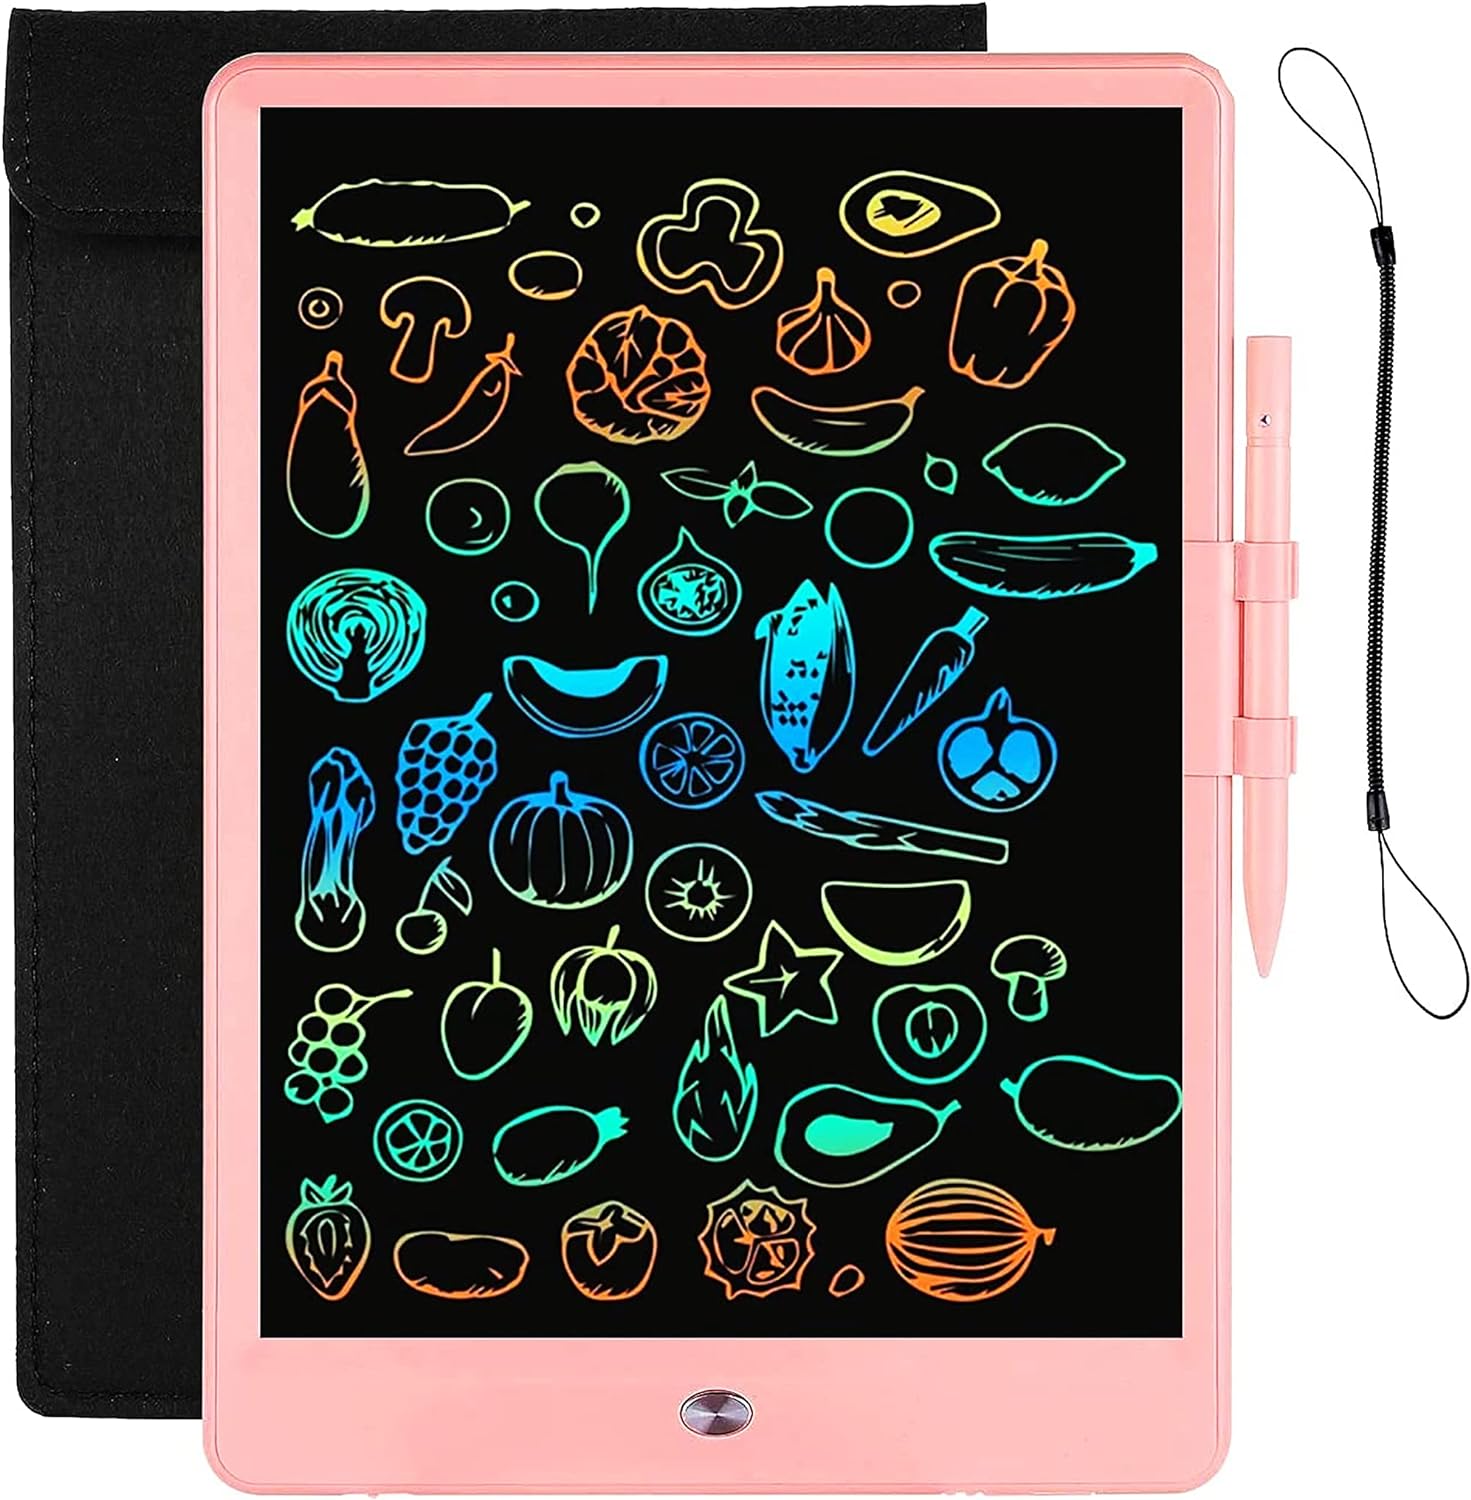 LCD Writing Tablet for Kids Doodle Board with Bag, Electronic Digital Colorful Screen Drawing Tablet, Etch a LEYAOYAO 10-Inch Drawing Pad Sketch Pads, Toy - Gift for 3-6 Years Old Girls Boys